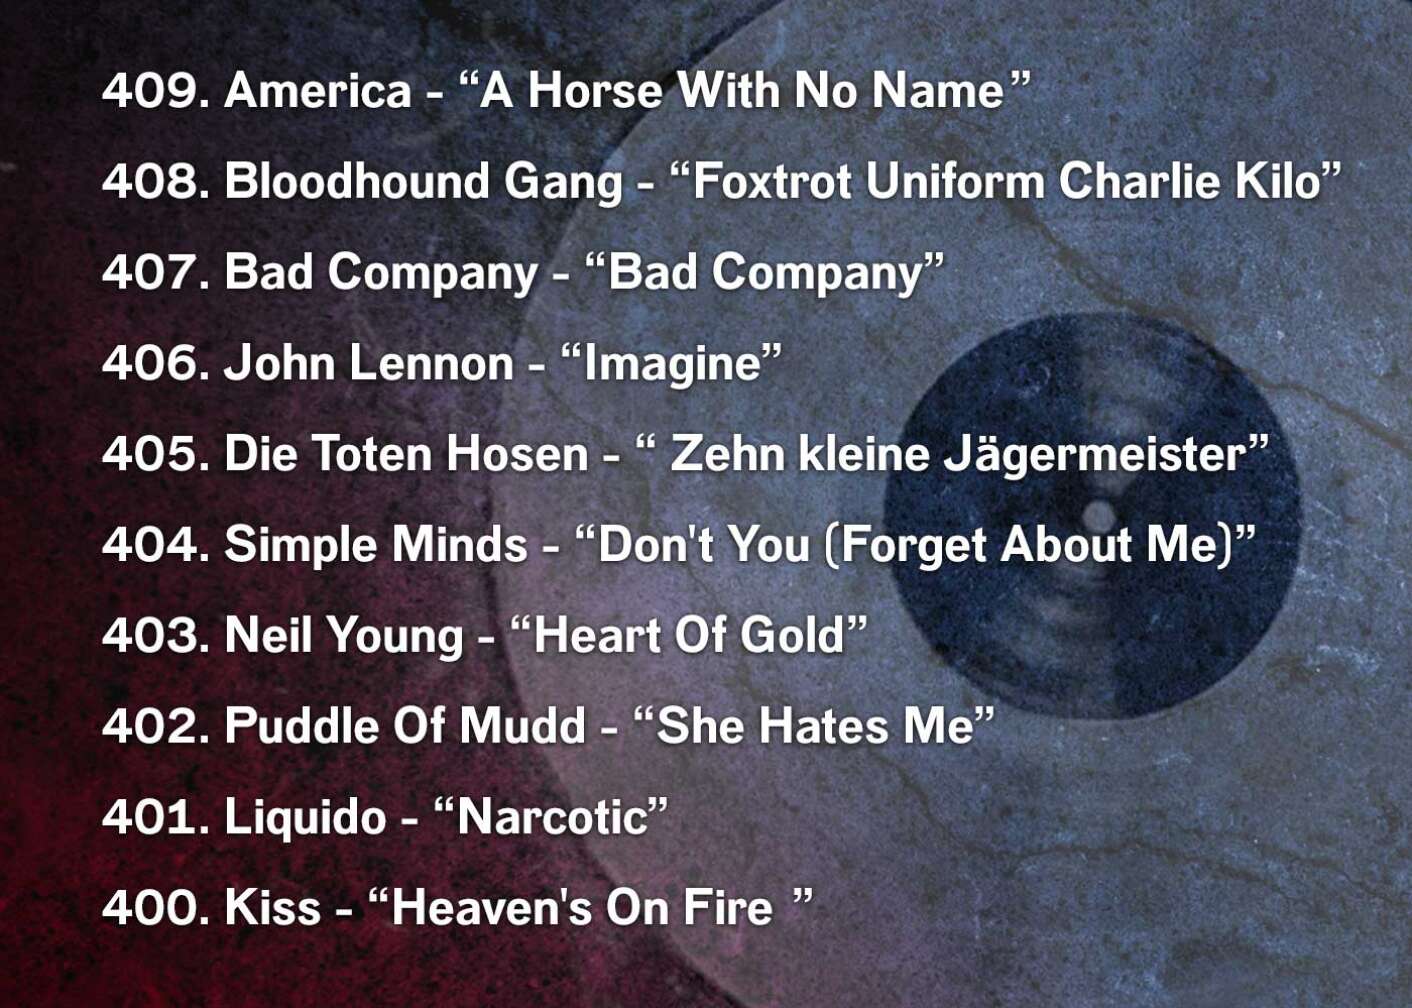 409. America - “A Horse With No Name	” 408. Bloodhound Gang - “Foxtrot Uniform Charlie Kilo” 407. Bad Company - “Bad Company” 406. John Lennon - “Imagine”	 405. Die Toten Hosen - “ Zehn kleine Jägermeister” 404. Simple Minds - “Don't You (Forget About Me)” 403. Neil Young - “Heart Of Gold” 402. Puddle Of Mudd - “She Hates Me” 401. Liquido - “Narcotic” 400. Kiss - “Heaven's On Fire	”